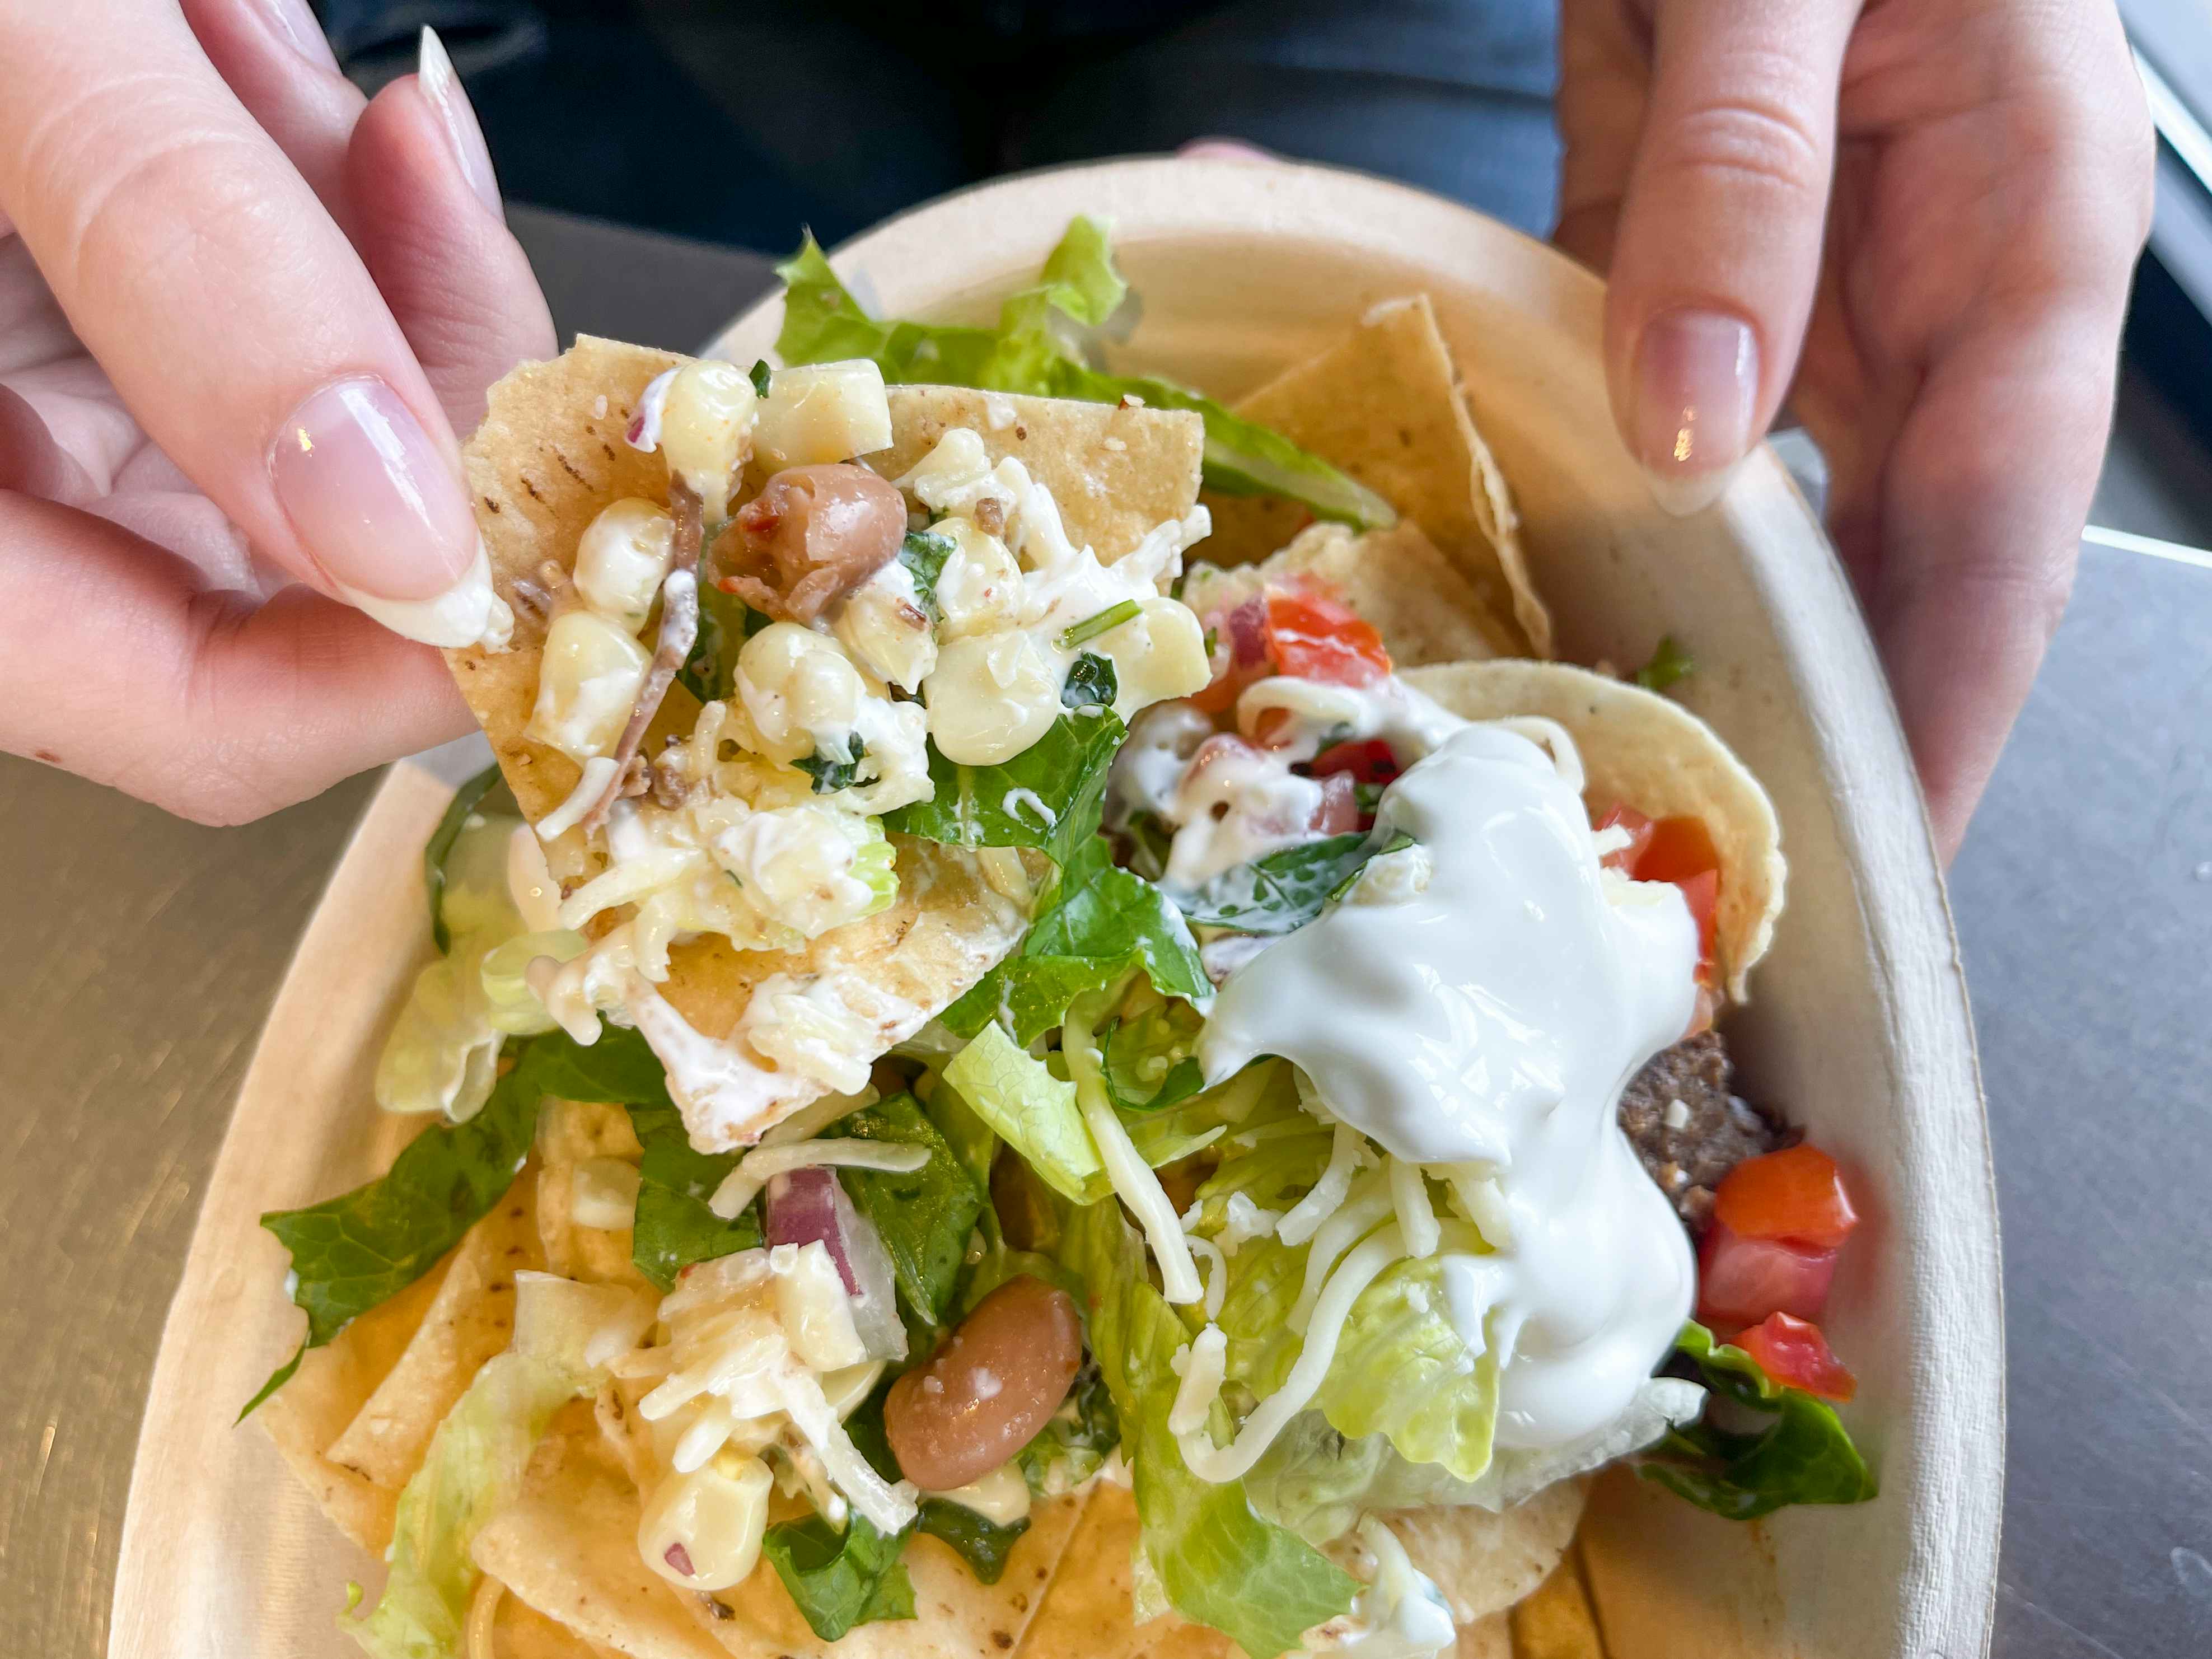 A person scooping up a chip with toppings in a bowl of nachos. Part of the chipotle secret menu.